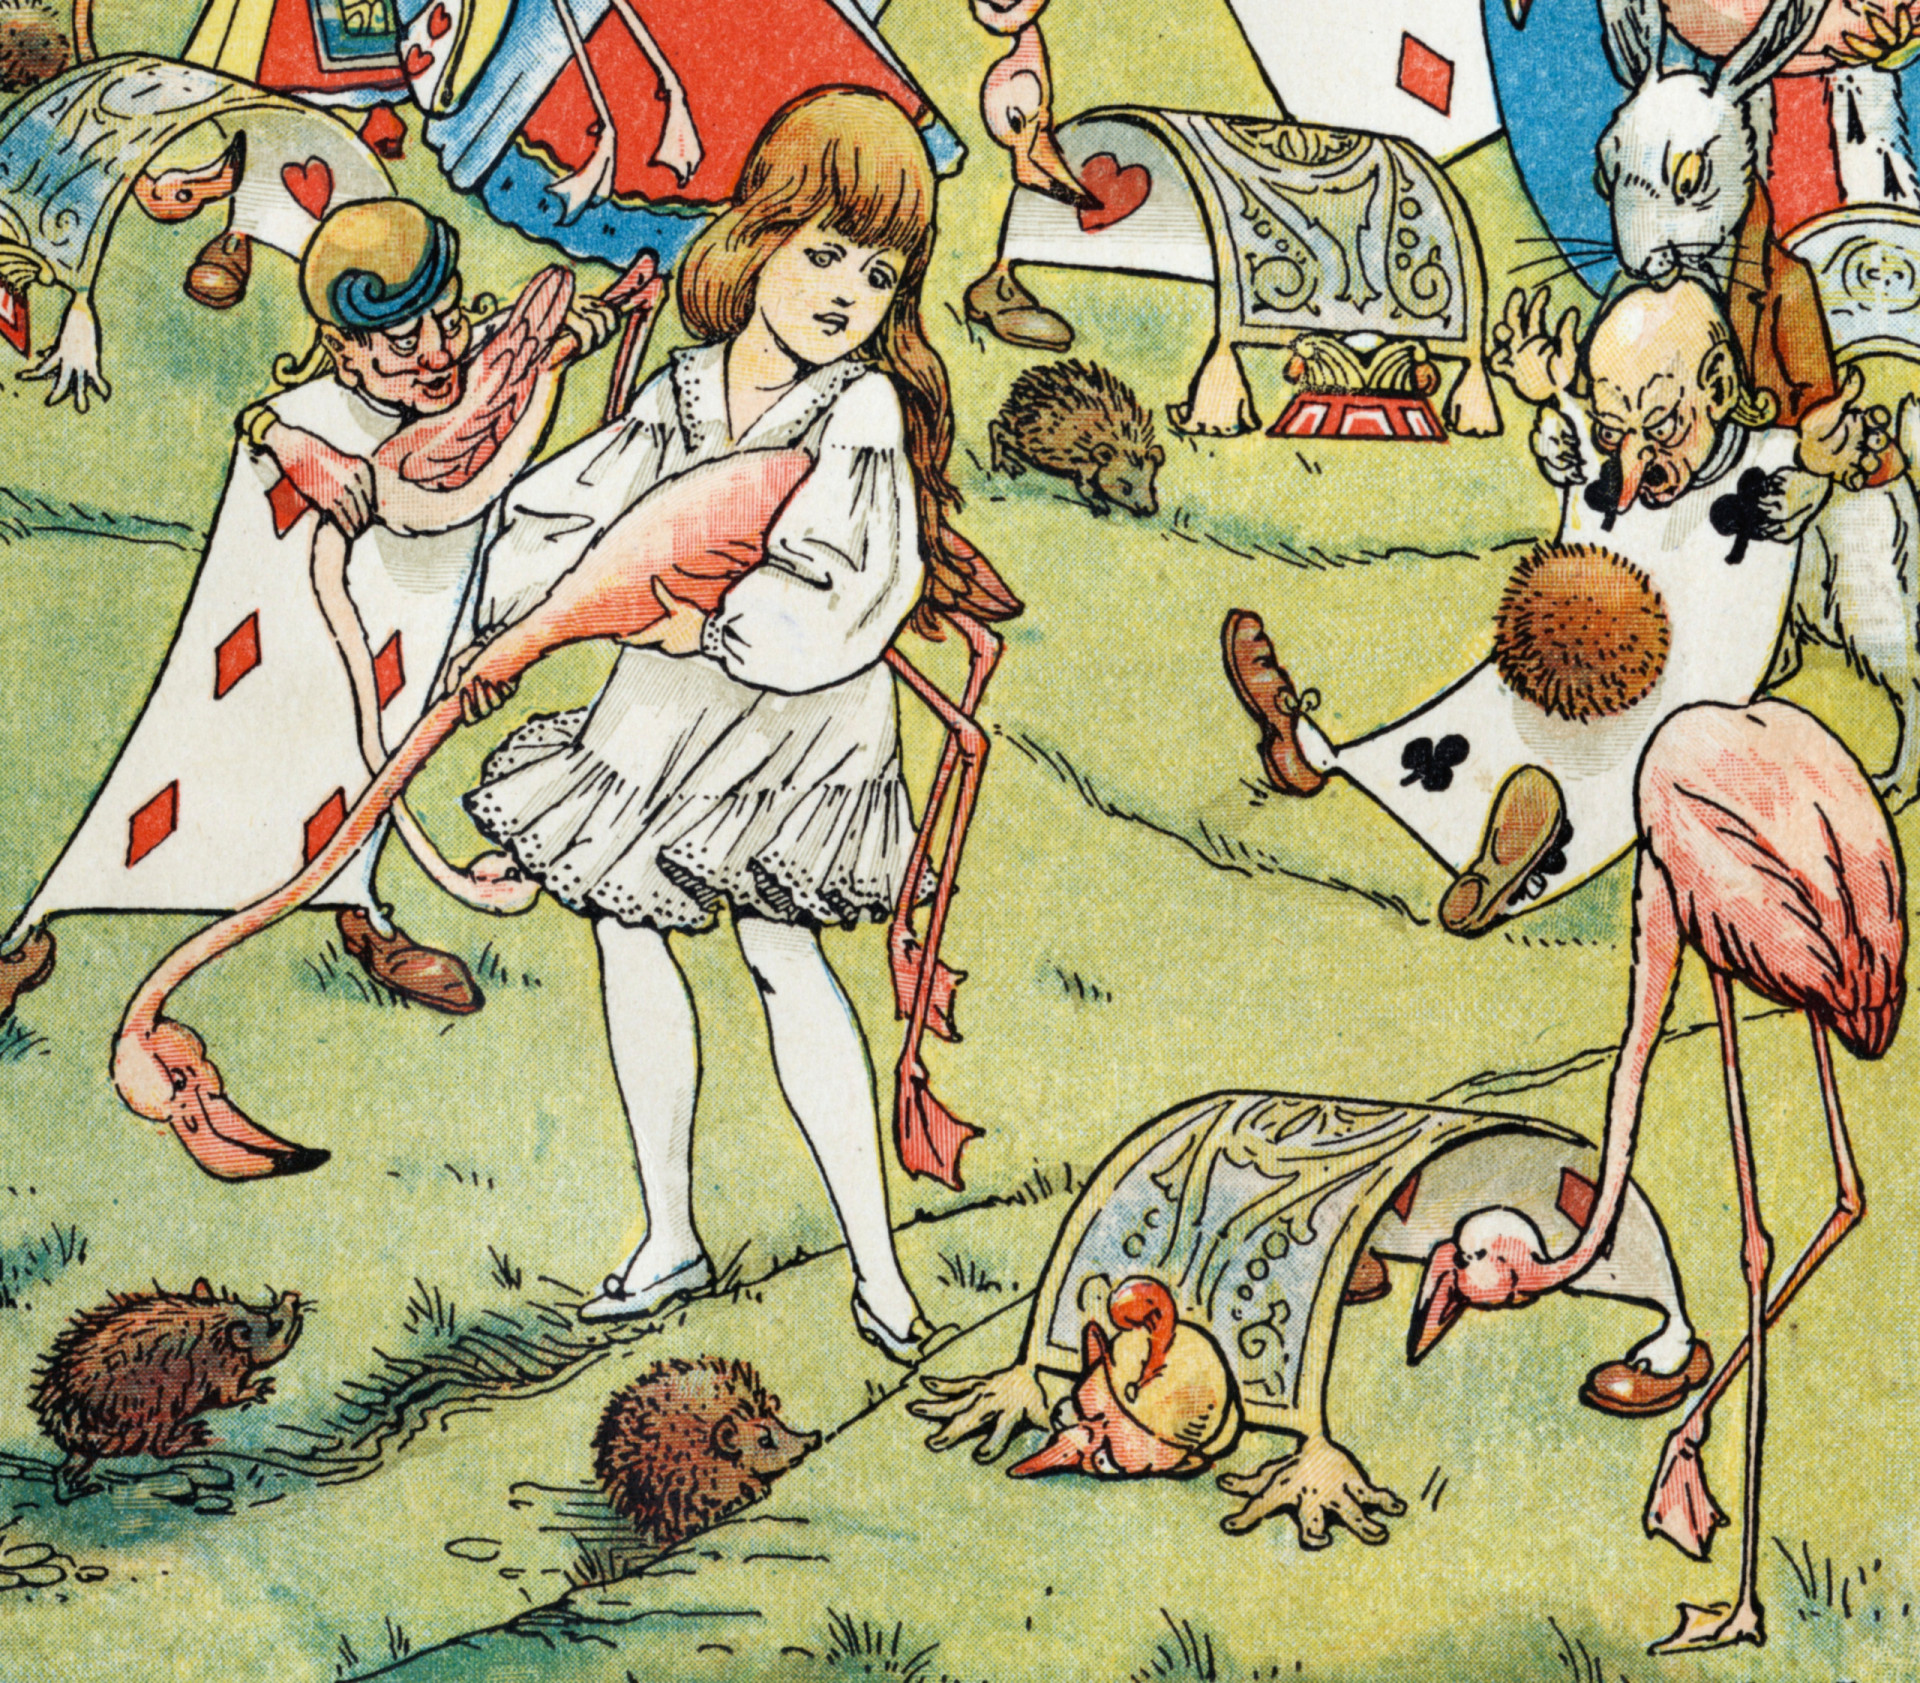 <p>In the story, Carroll draws on real-life events to fuel his own imagination. The hideous Queen's croquet game described in chapter eight of the novel is likely based on the competitions Alice Liddell herself would have enjoyed as a youngster on the trimmed lawns of Christ Church in Oxford where her father, Henry Liddell, served as ecclesiastical dean.</p><p>You may also like:<a href="https://www.starsinsider.com/n/163359?utm_source=msn.com&utm_medium=display&utm_campaign=referral_description&utm_content=558001en-en"> The best road trip route through the Southern United States</a></p>